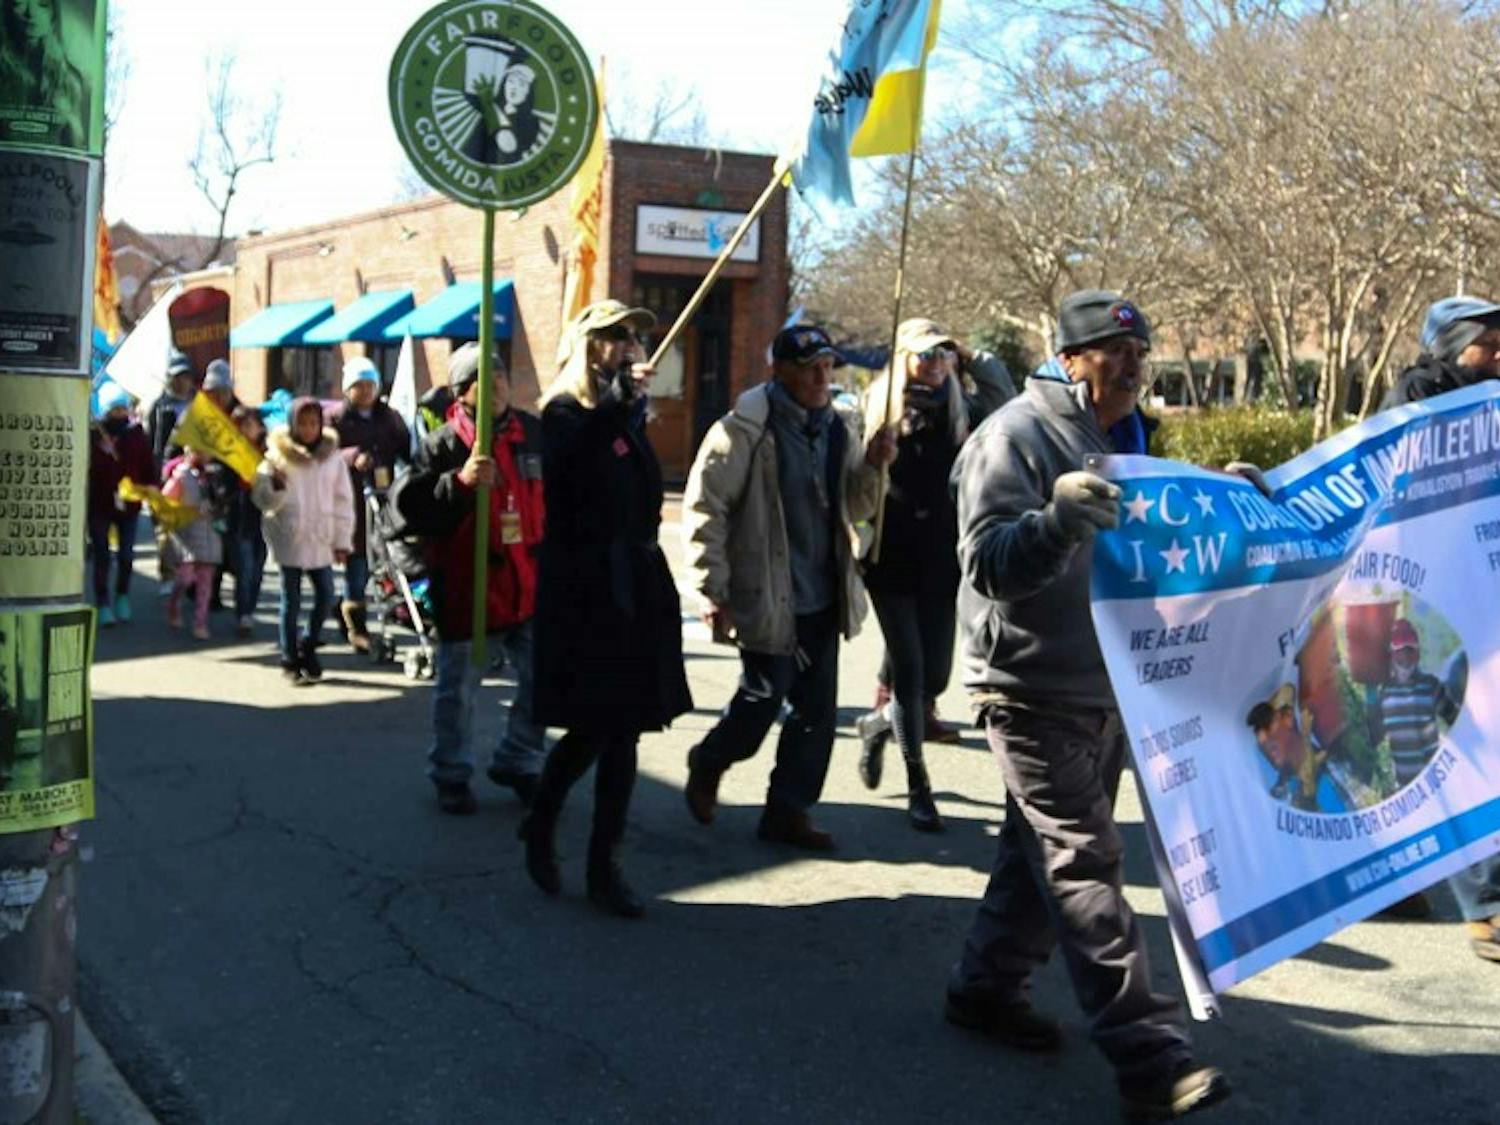 Demonstrators march on E. Main Street in Carrboro on Tuesday to protest the labor practices of Wendy’s.